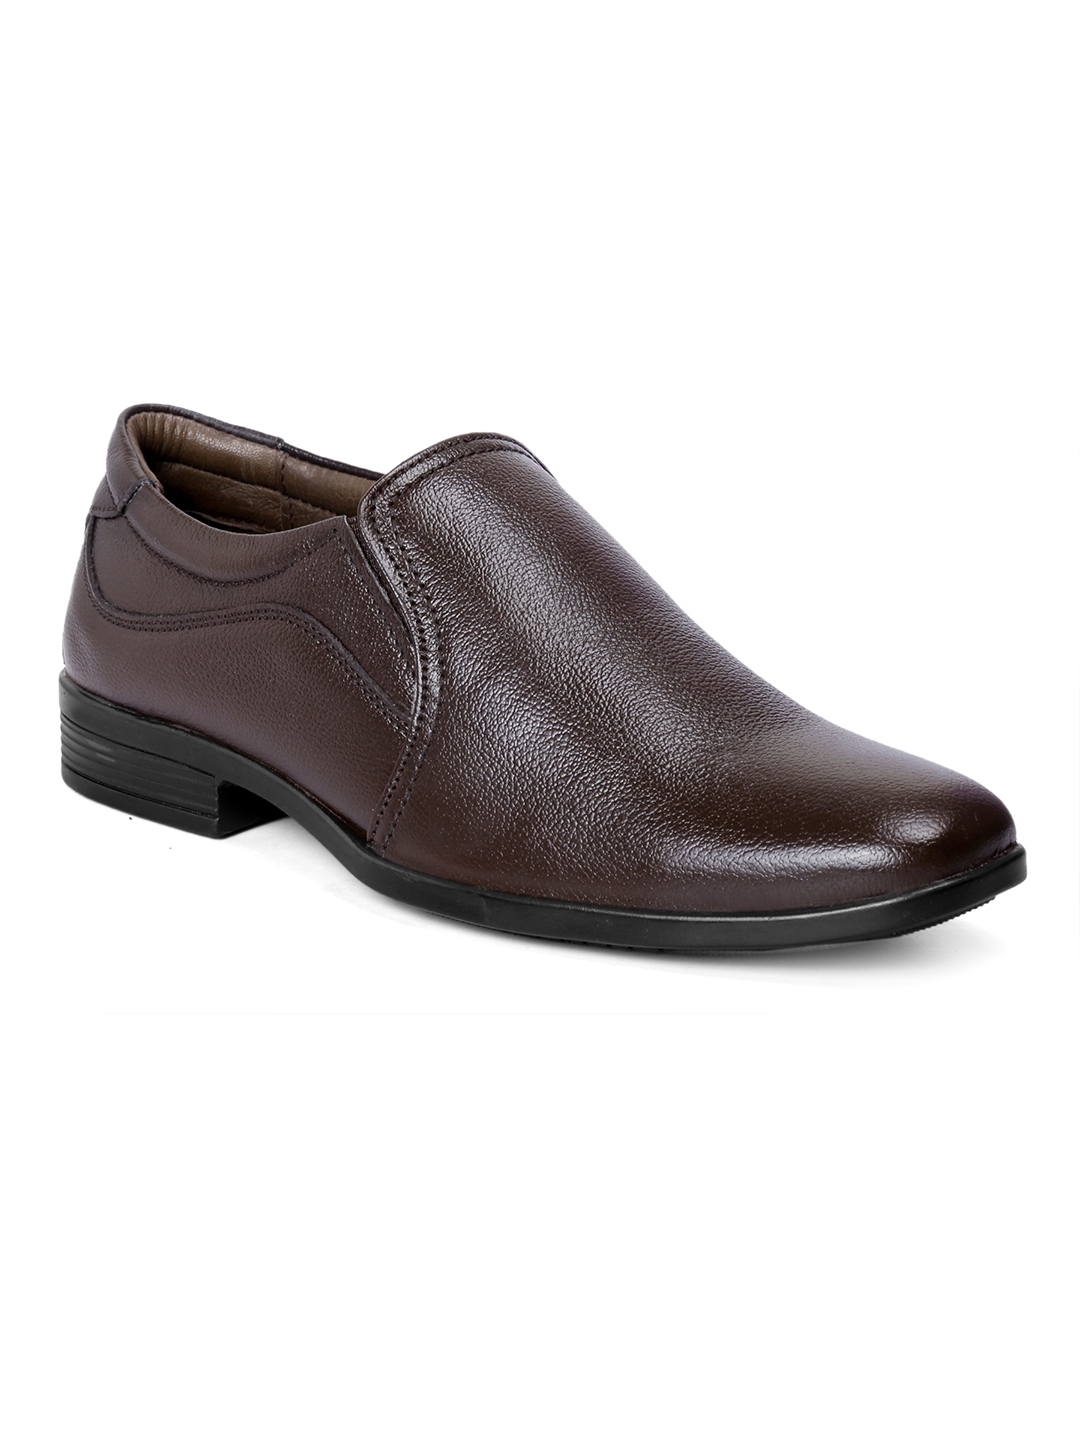 bacca bucci men's leather formal shoes